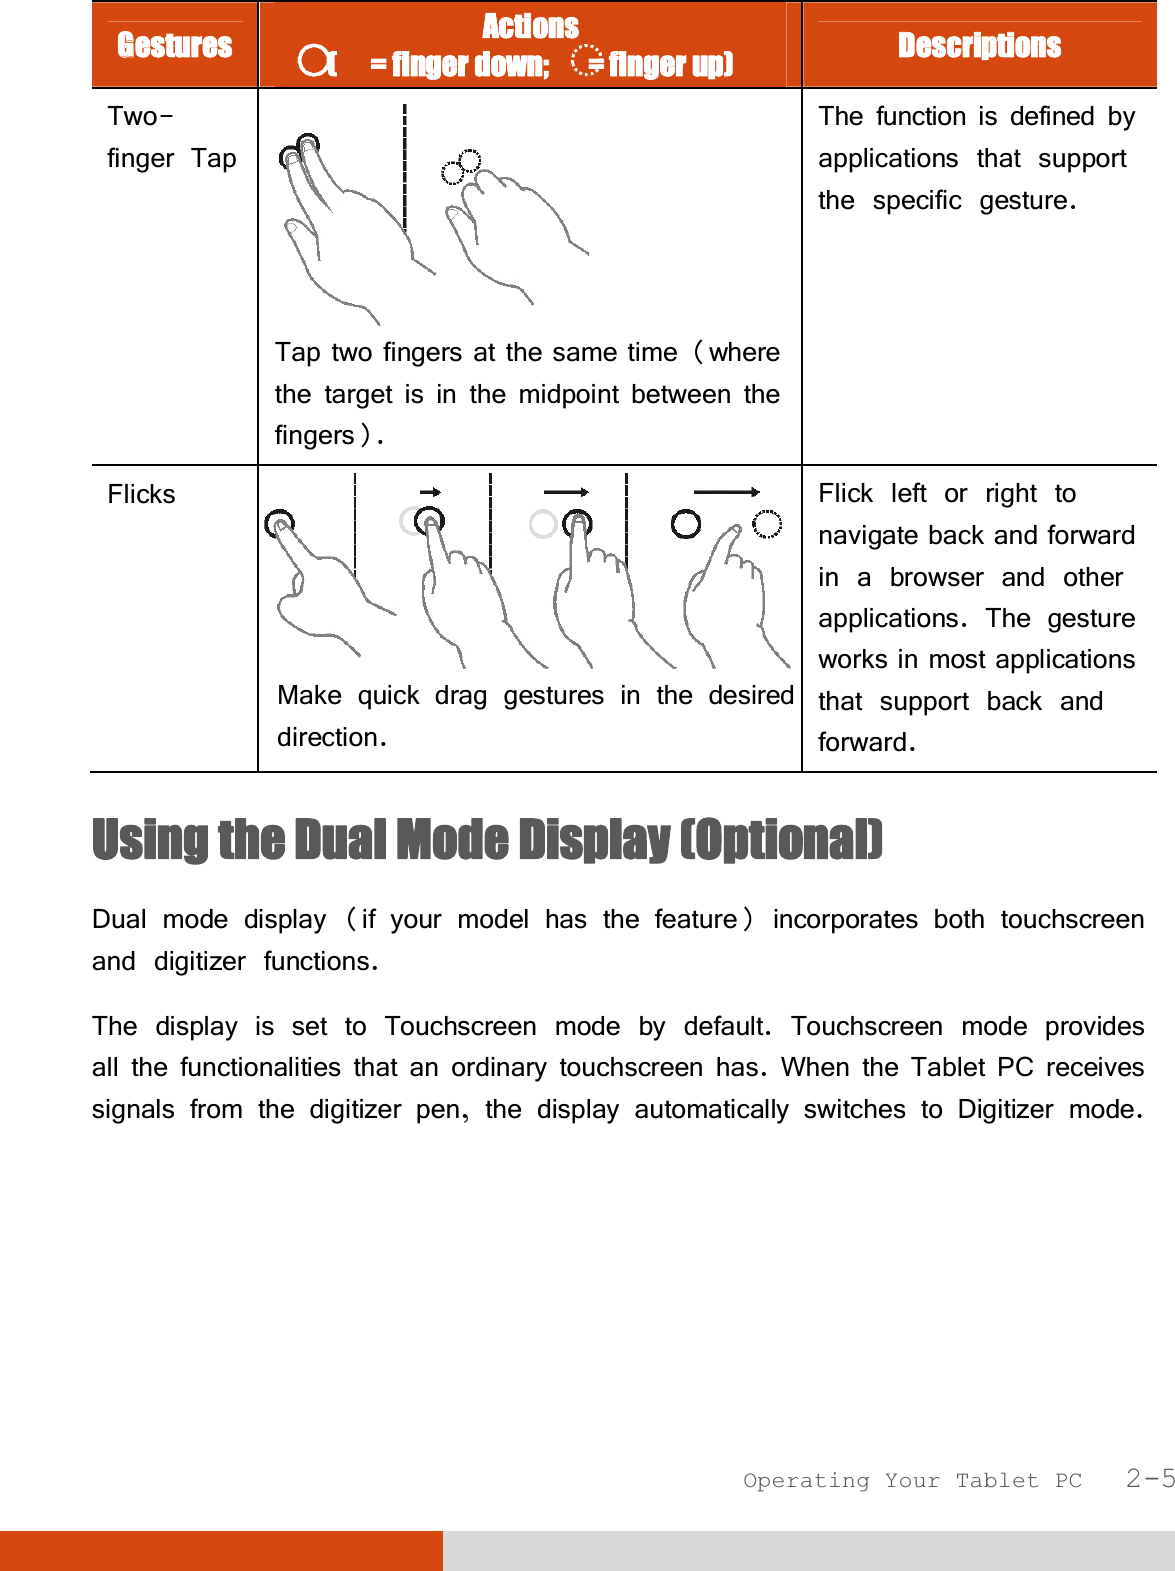  Operating Your Tablet PC   2-5 GGestures  Actions (      = finger down;       = finger up)  Descriptions Two- finger Tap  Tap two fingers at the same time (where the target is in the midpoint between the fingers). The function is defined by applications that support the specific gesture.  Flicks  Make quick drag gestures in the desired direction. Flick left or right to navigate back and forward in a browser and other applications. The gesture works in most applications that support back and forward. Using the Dual Mode Display (Optional) Dual mode display (if your model has the feature) incorporates both touchscreen and digitizer functions. The display is set to Touchscreen mode by default. Touchscreen mode provides all the functionalities that an ordinary touchscreen has. When the Tablet PC receives signals from the digitizer pen, the display automatically switches to Digitizer mode. 